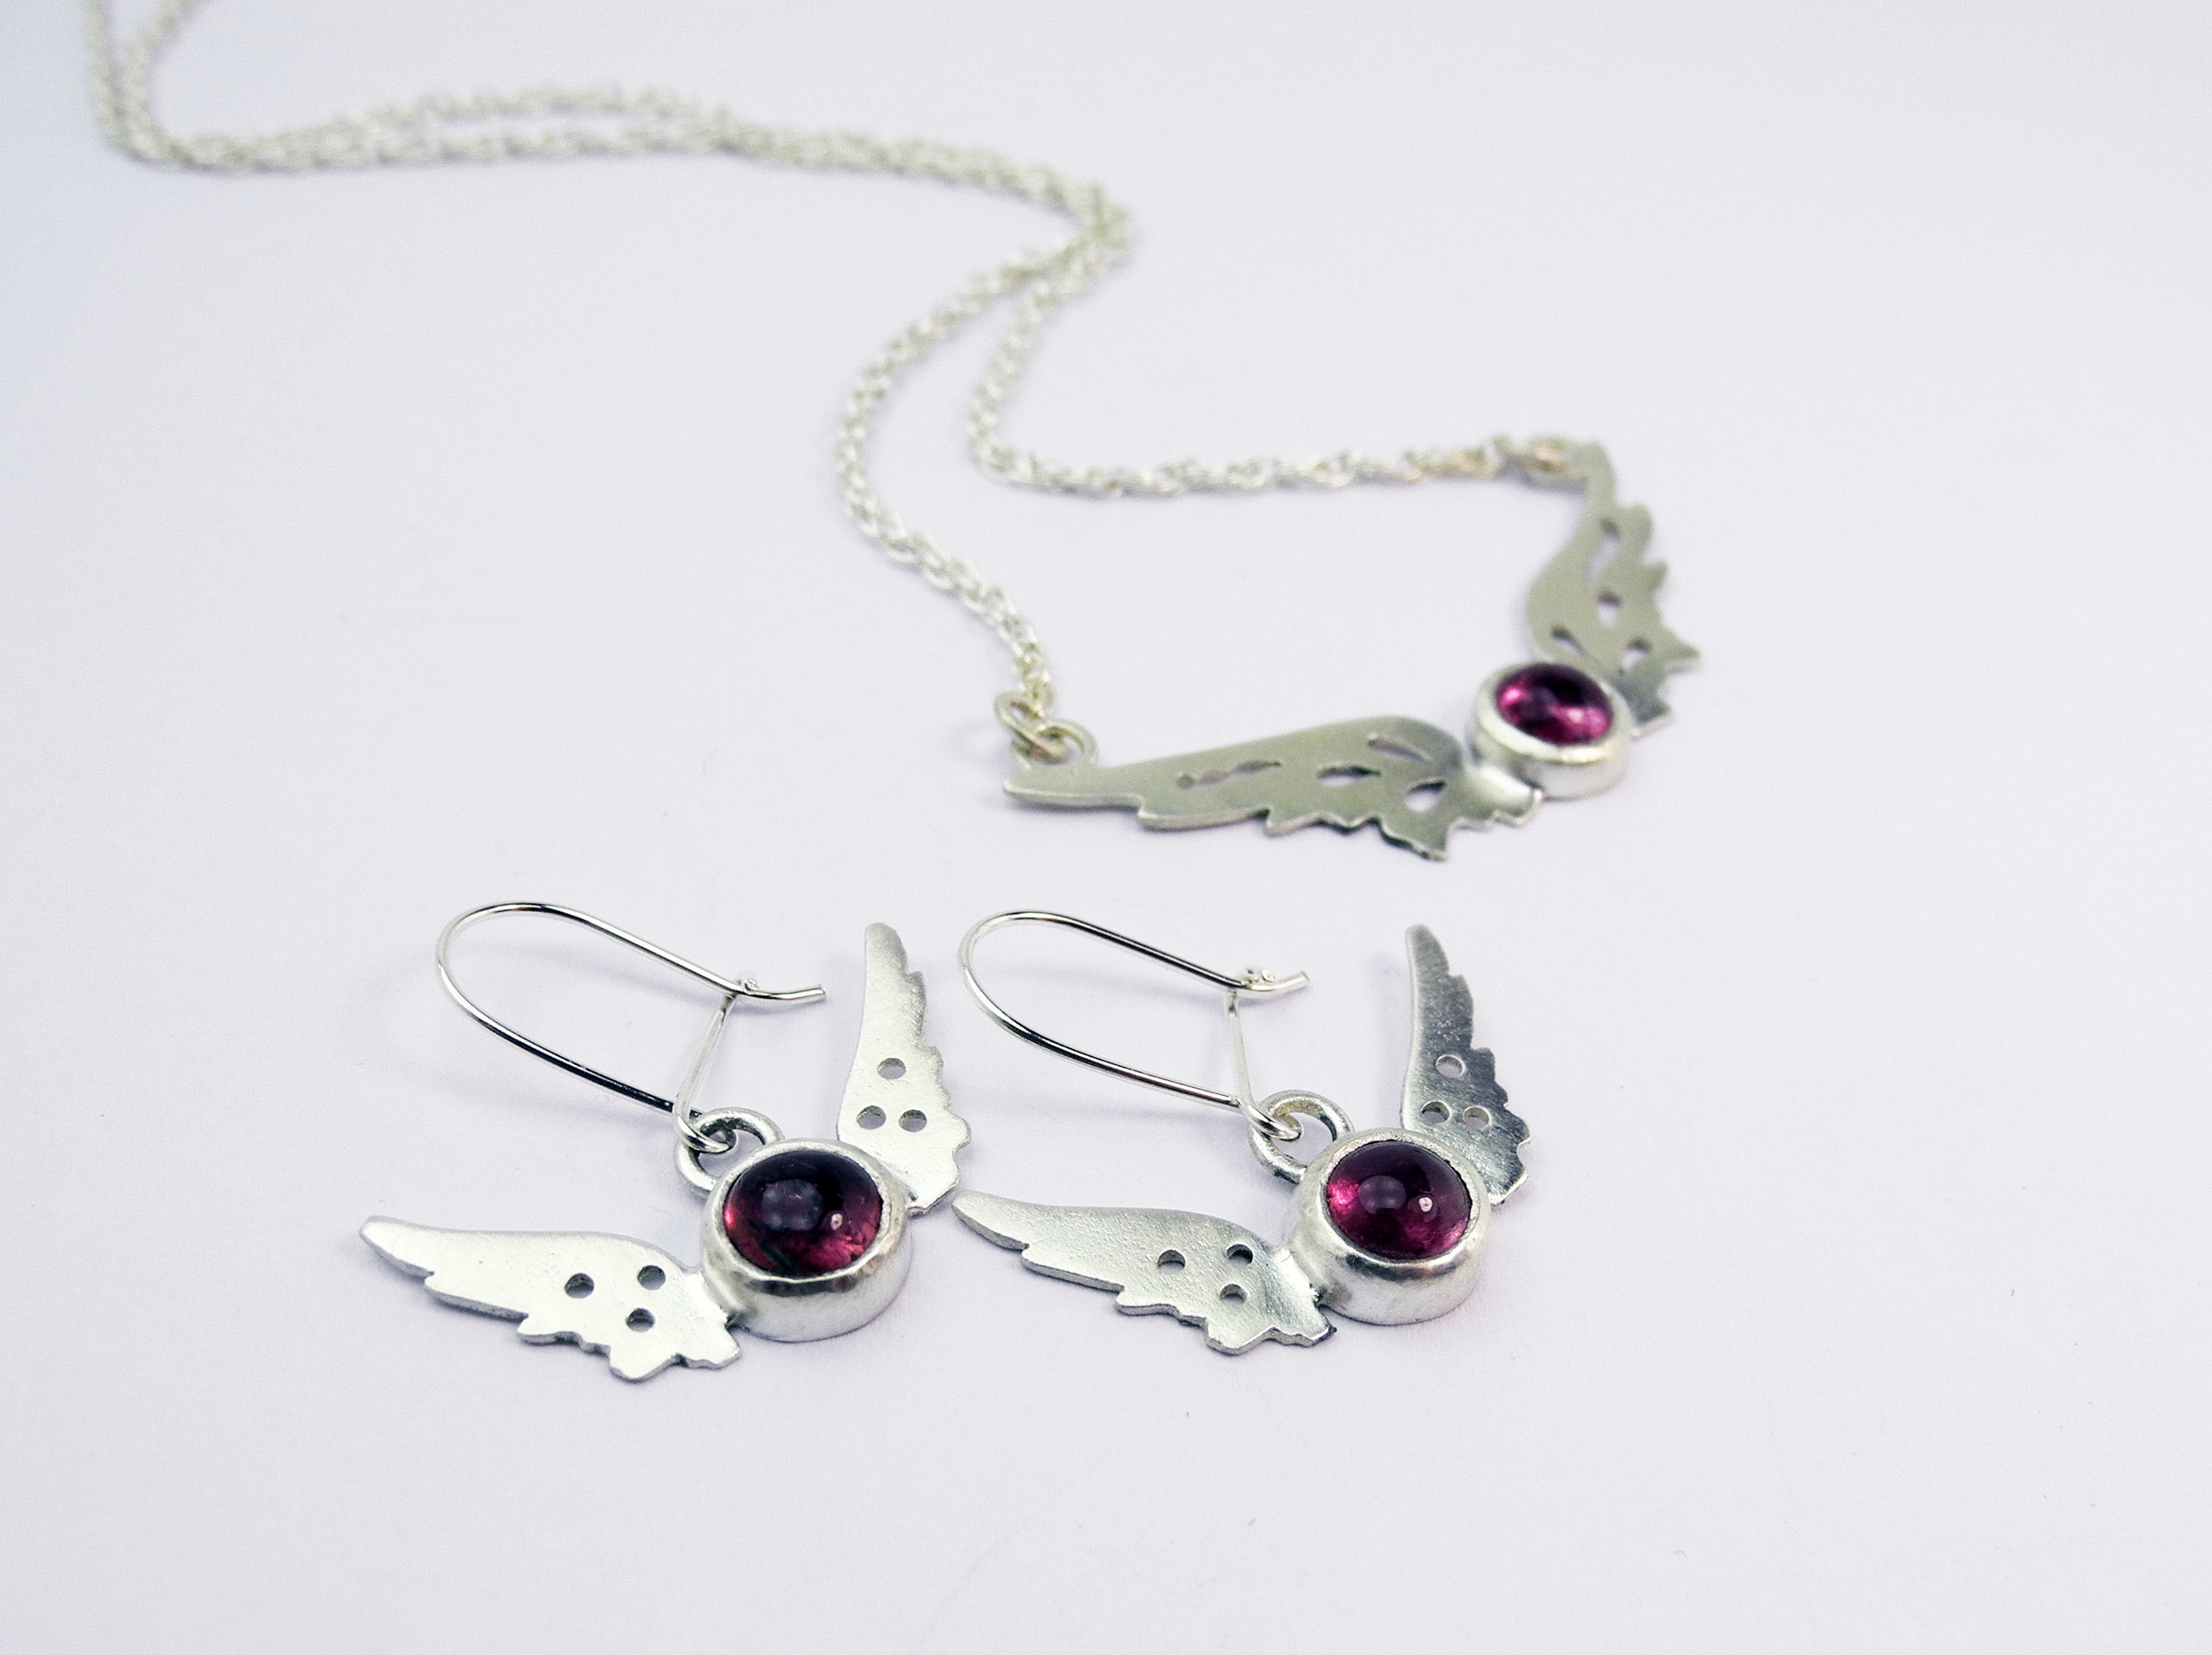 Tiny Wings earrings and pendant set with pink tourmaline